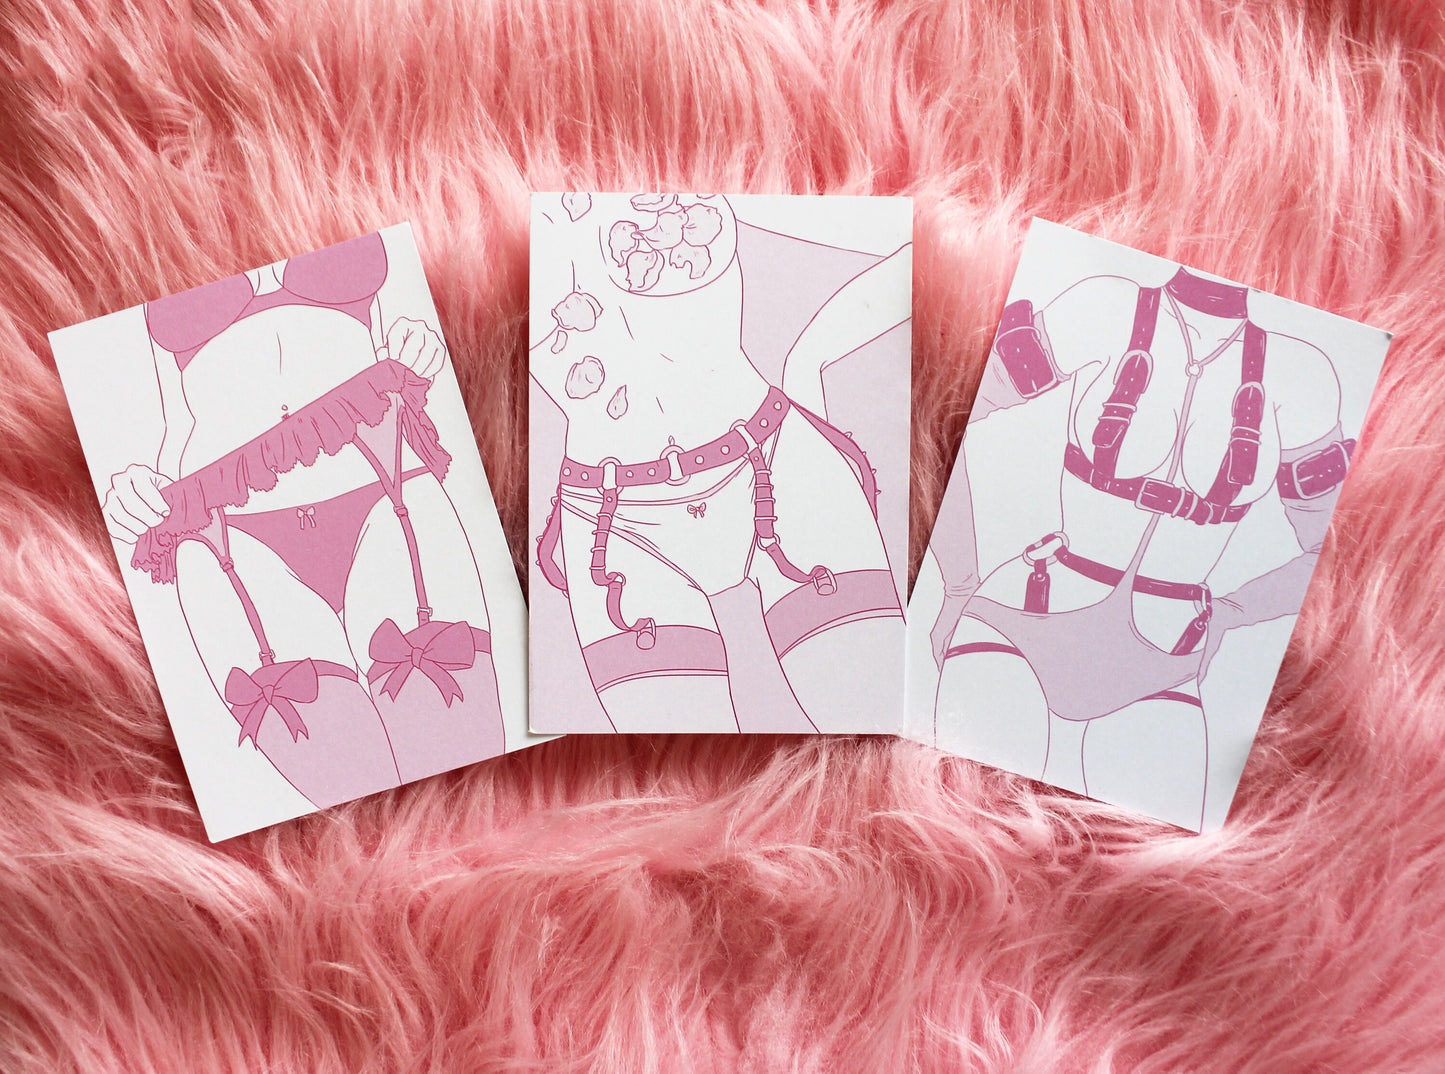 Pastel Girls in Garters Cover Art A6 Print